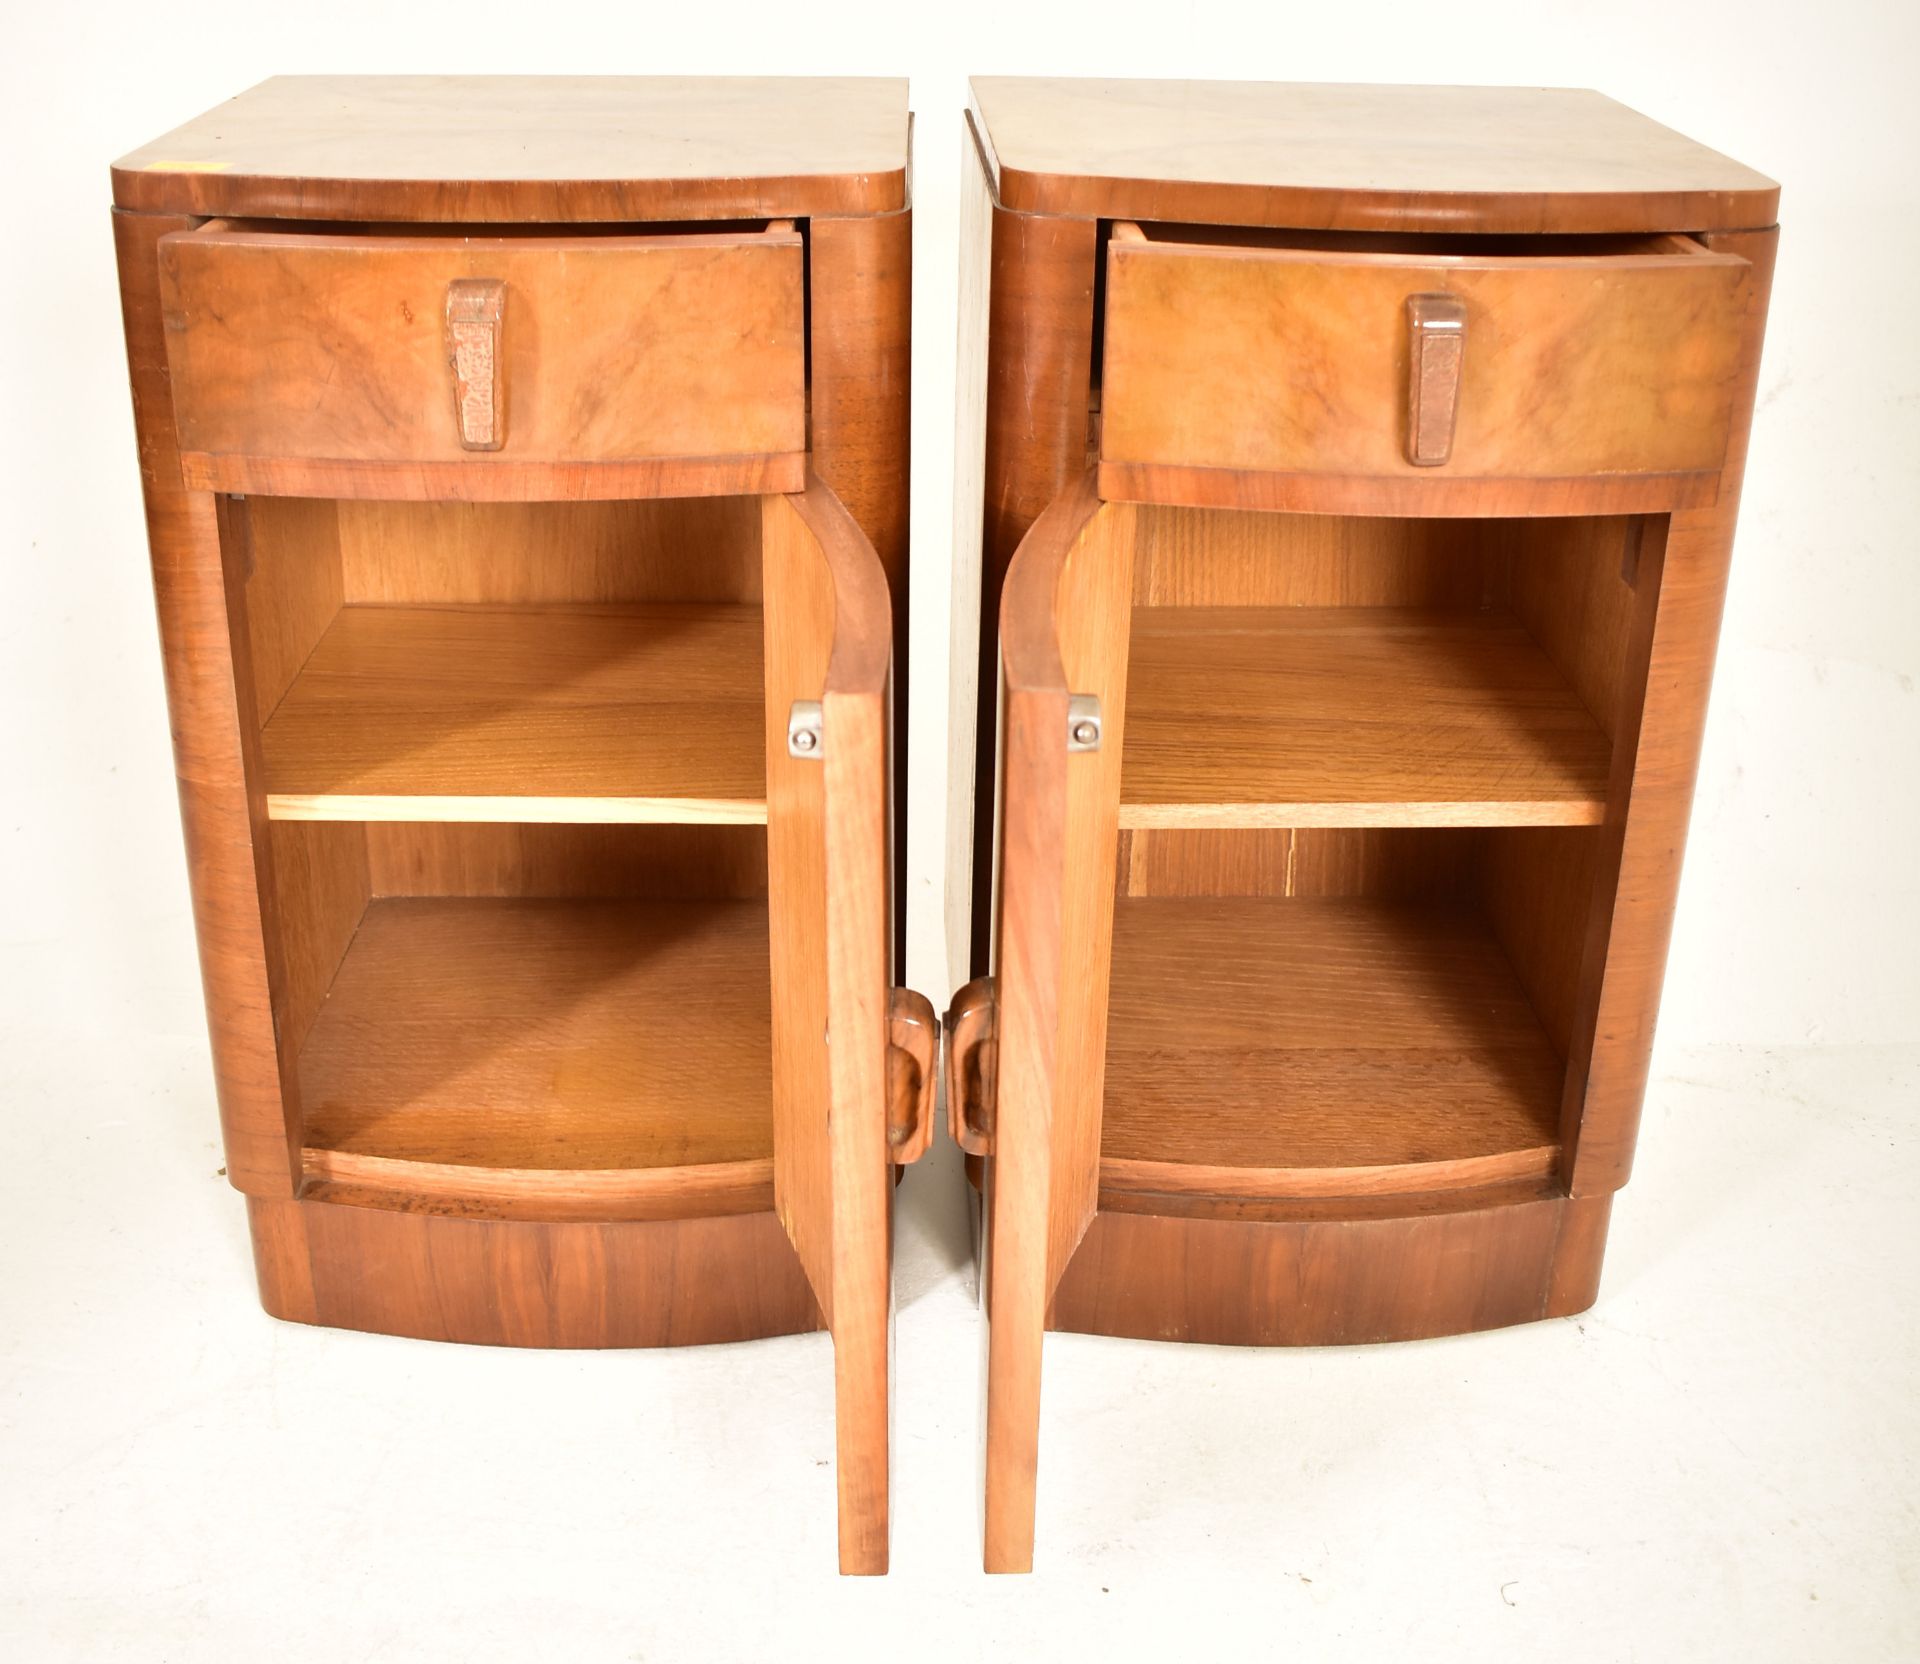 PAIR OF 20TH CENTURY ART DECO WALNUT BEDSIDE CUPBOARDS - Image 3 of 5